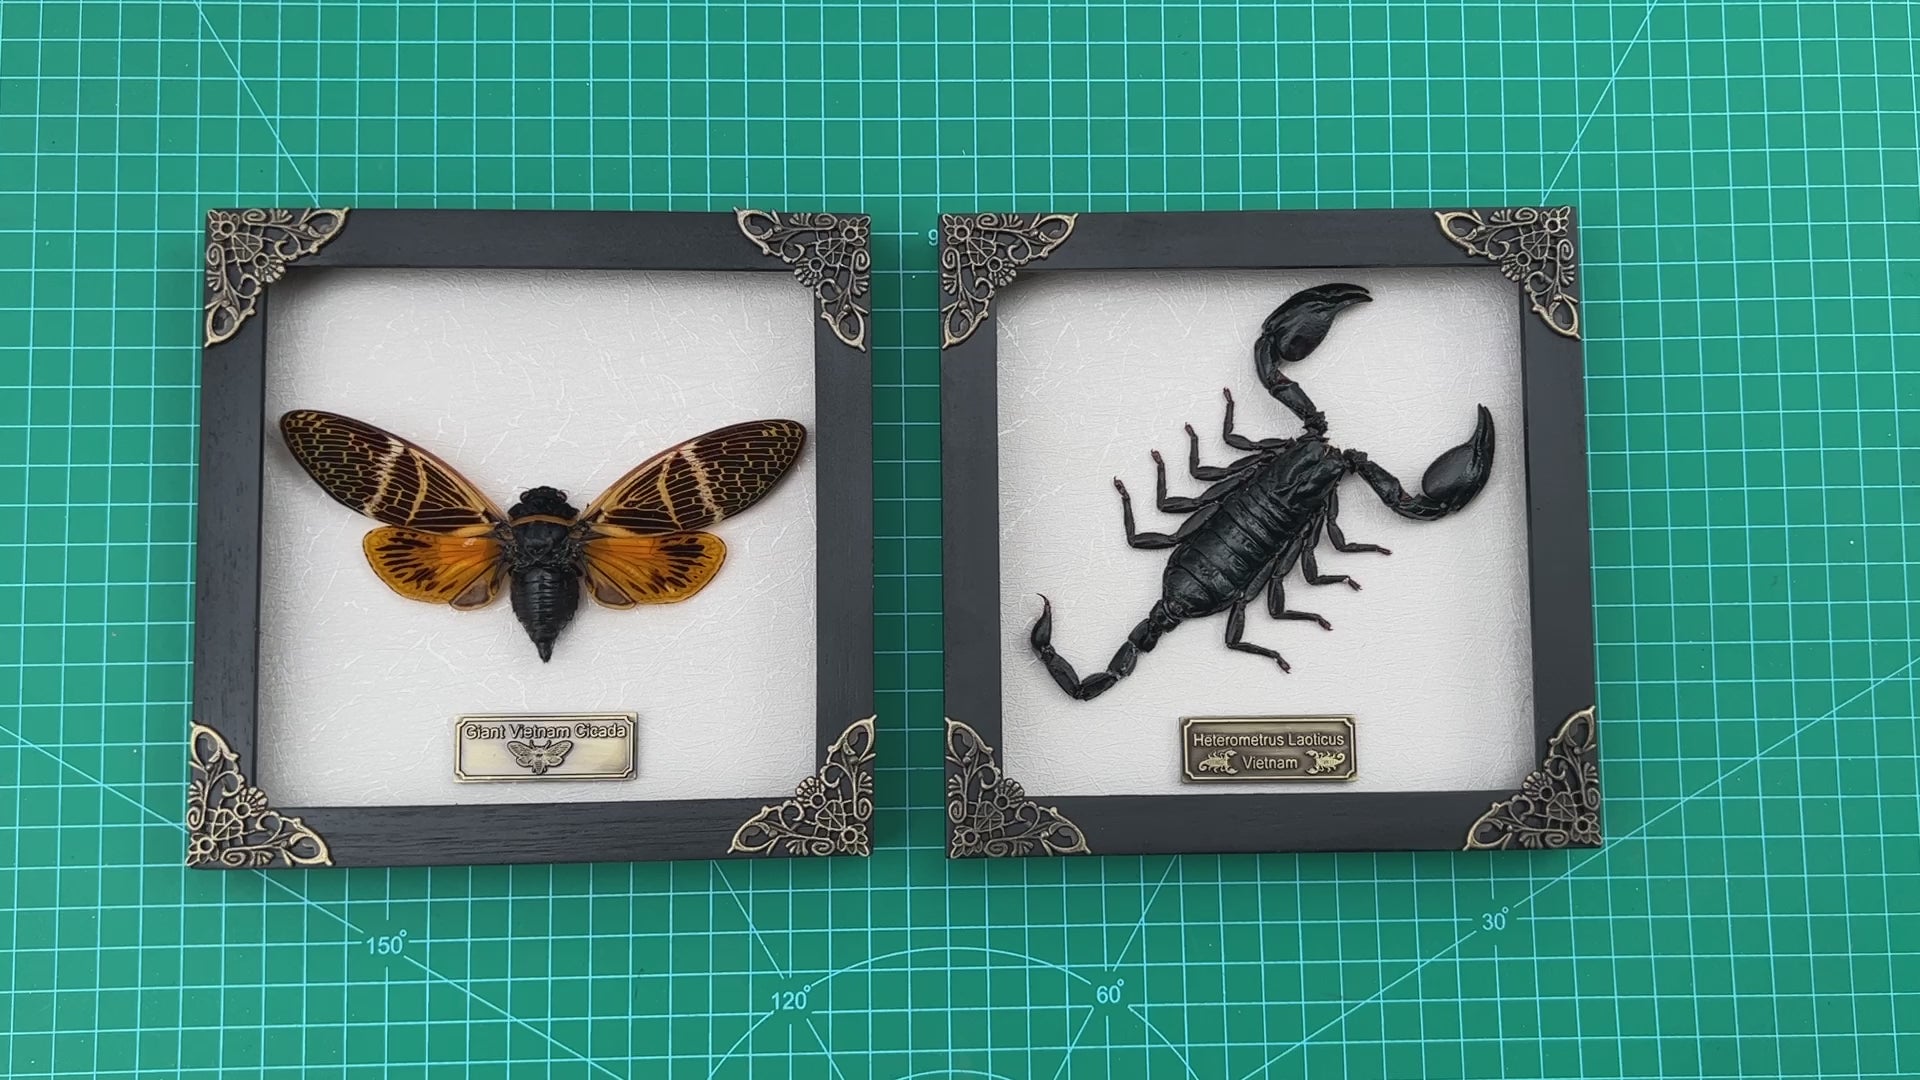 Pack of 2 Real Framed Scorpion Cicada Beetle Shadow Box Insect Unique Taxidermy Collectables Tabletop Wall Art Home Decor Living Gallery K16-50TR51TR